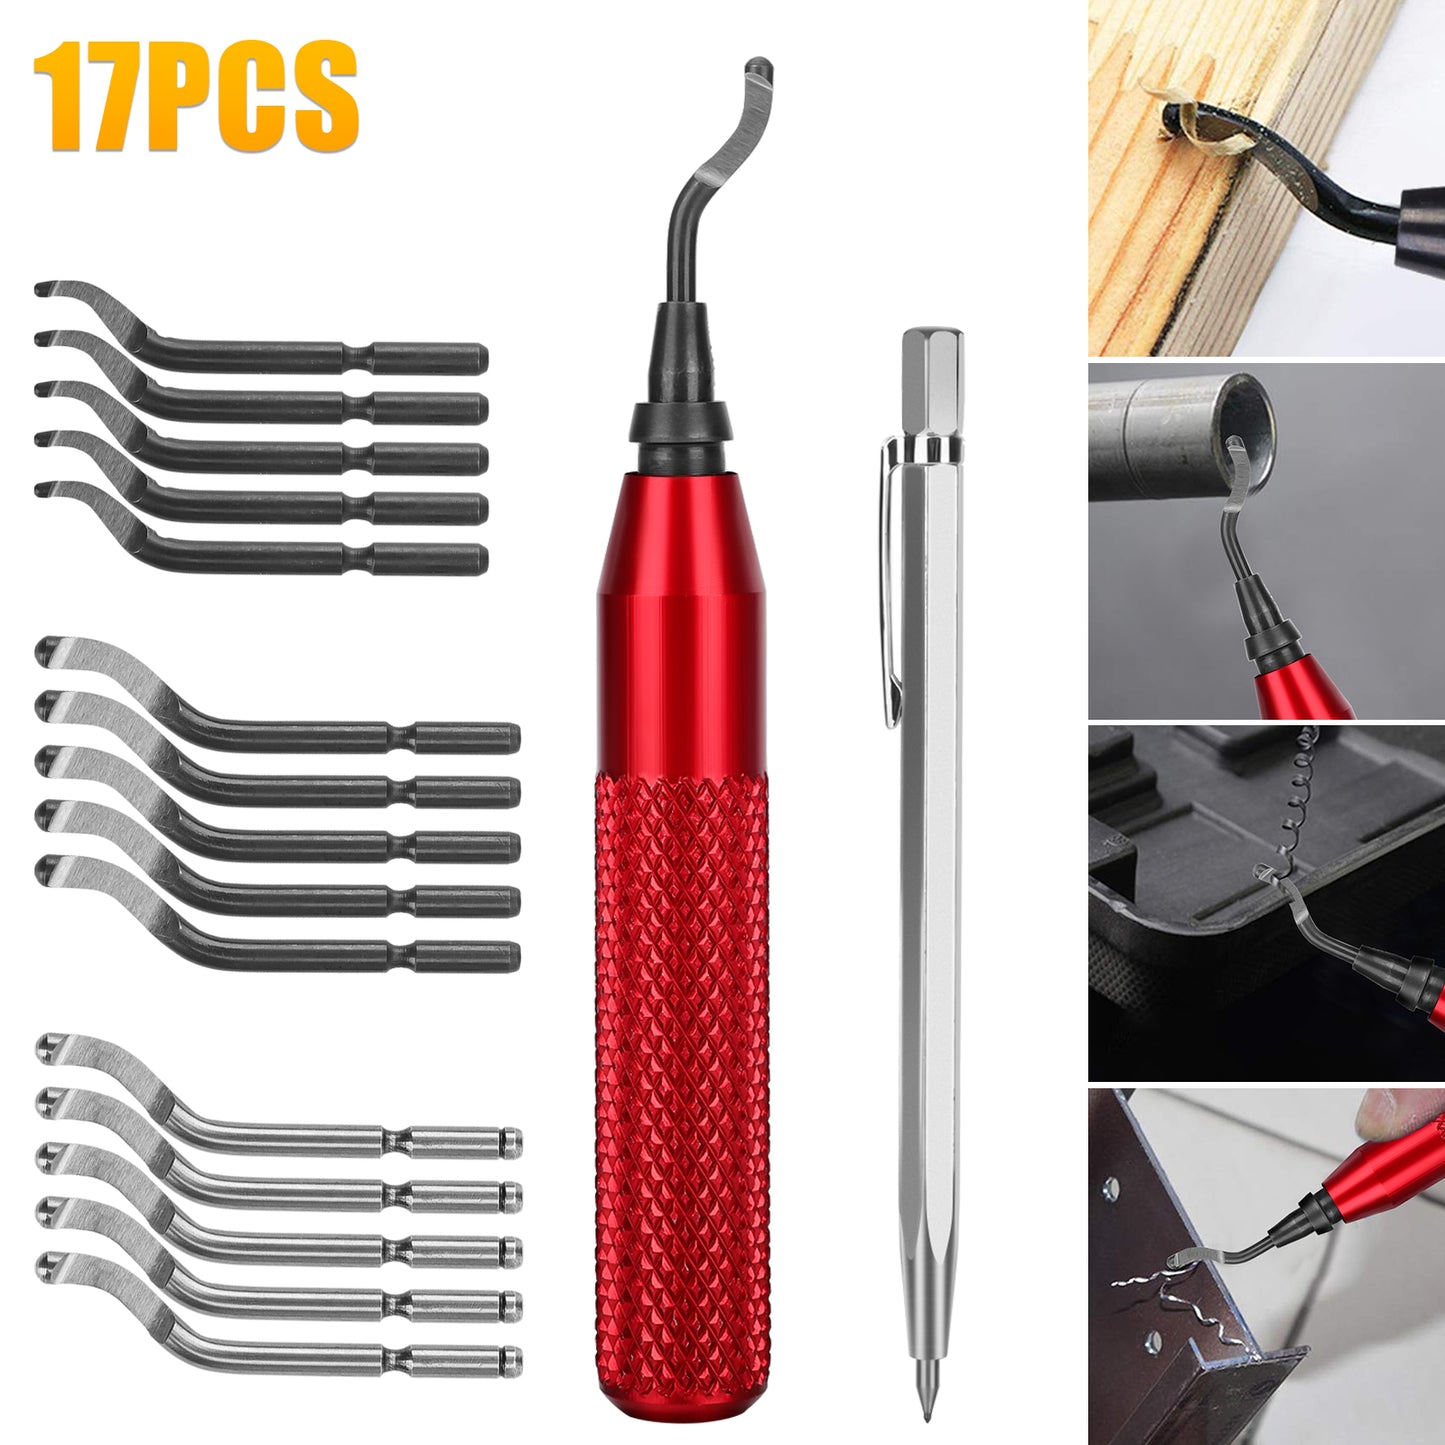 Deburring Tool Set - 15-Piece Blade Set for Metal, Wood, Plastic, and 3D Printing Finishing